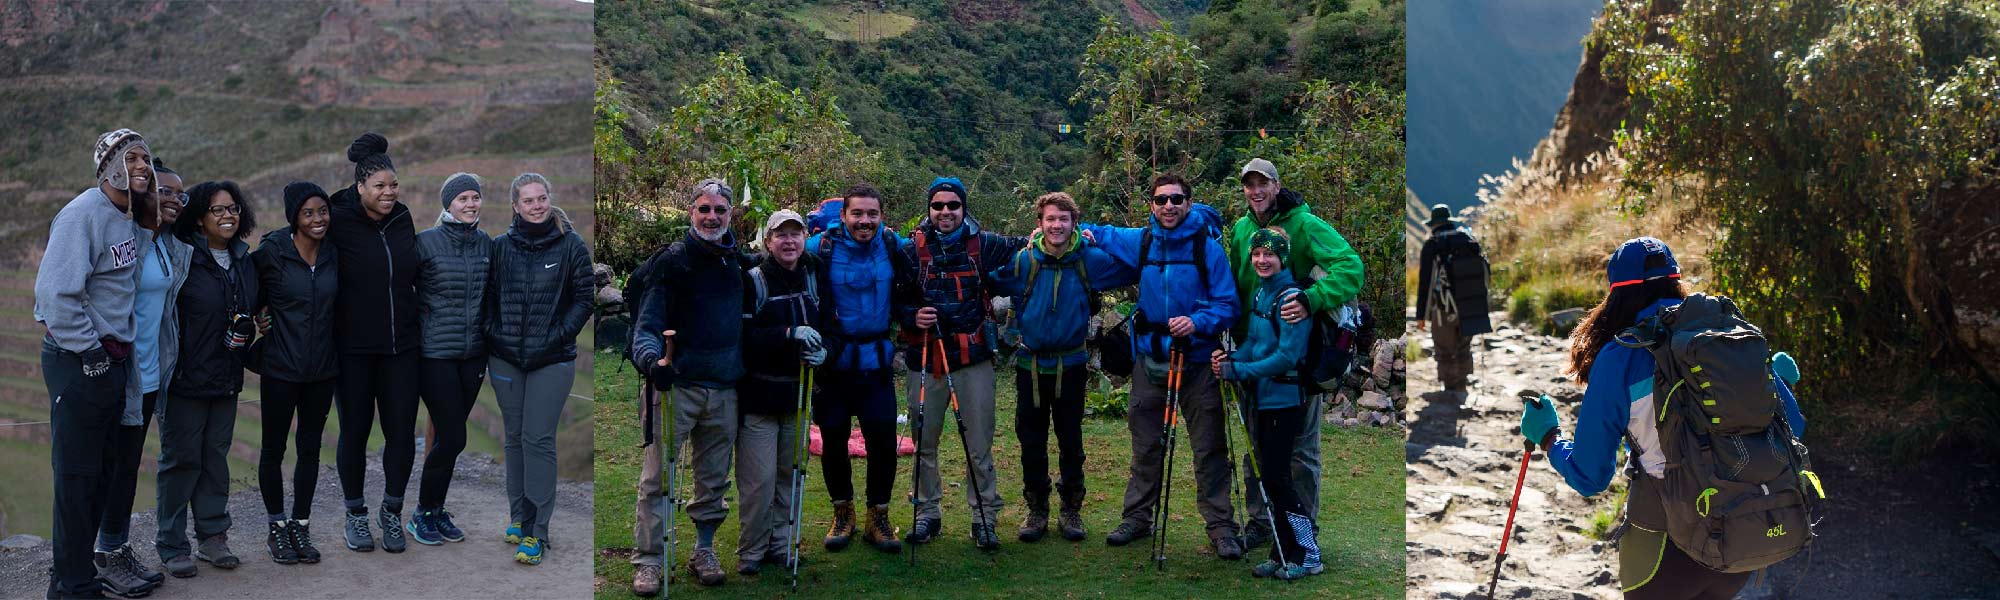 Packing list for the Inca Trail